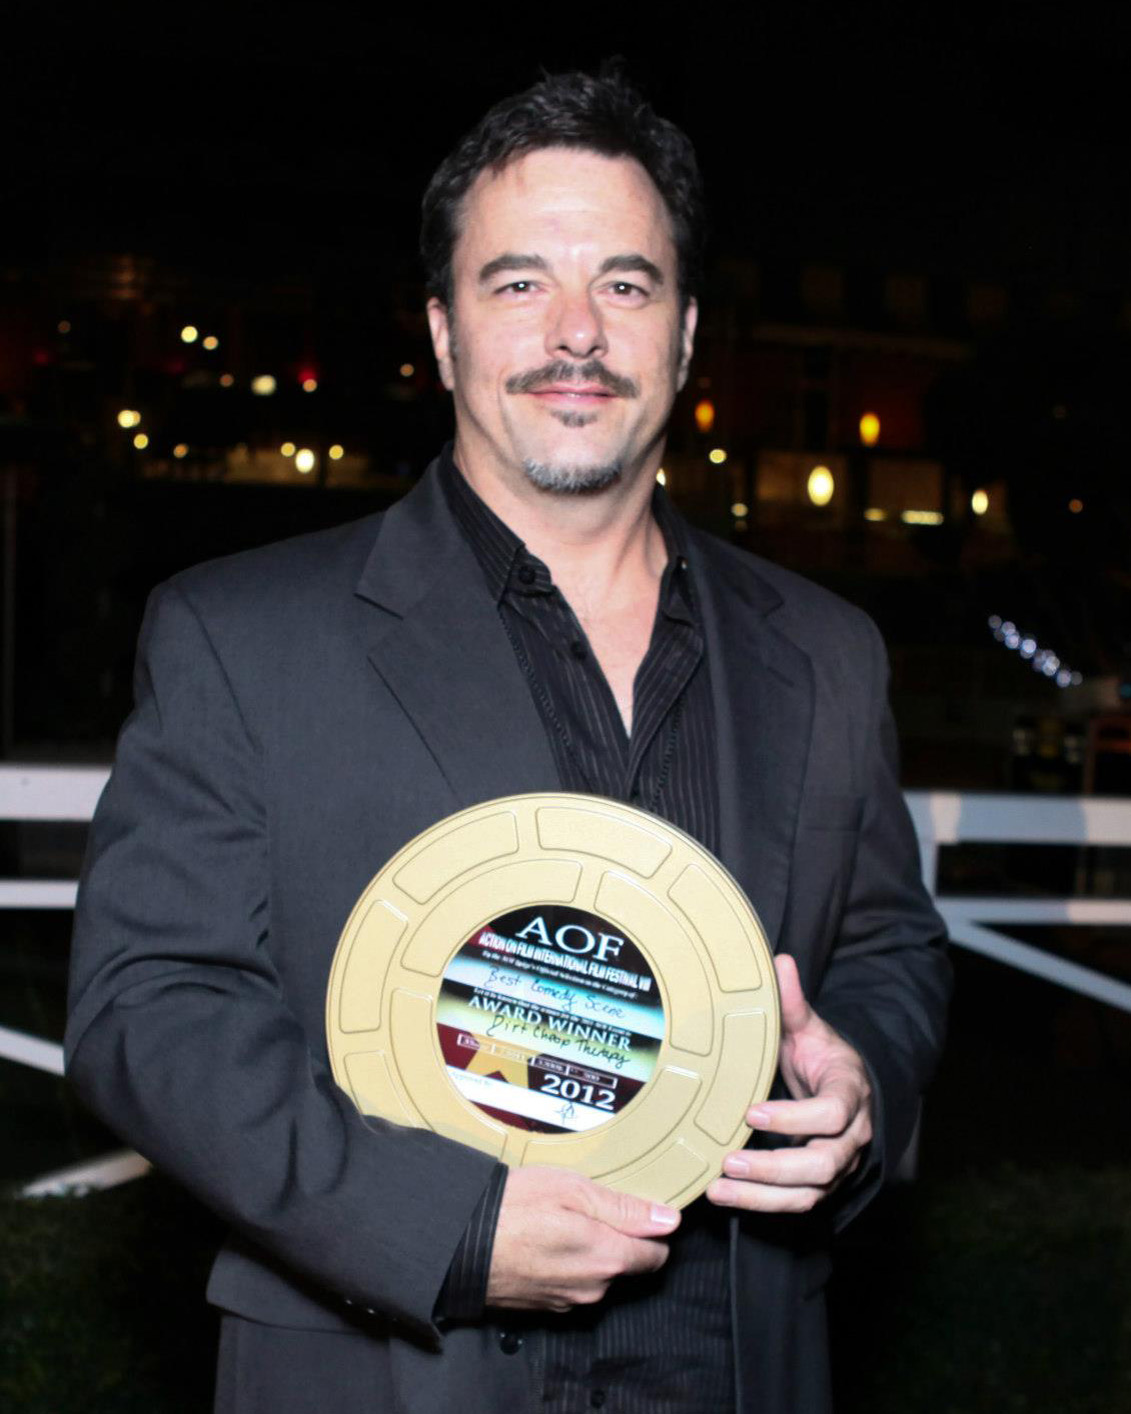 John Foutz at the Action on Film Awards Banquet at the Santa Anita Race Track with Award in hand.